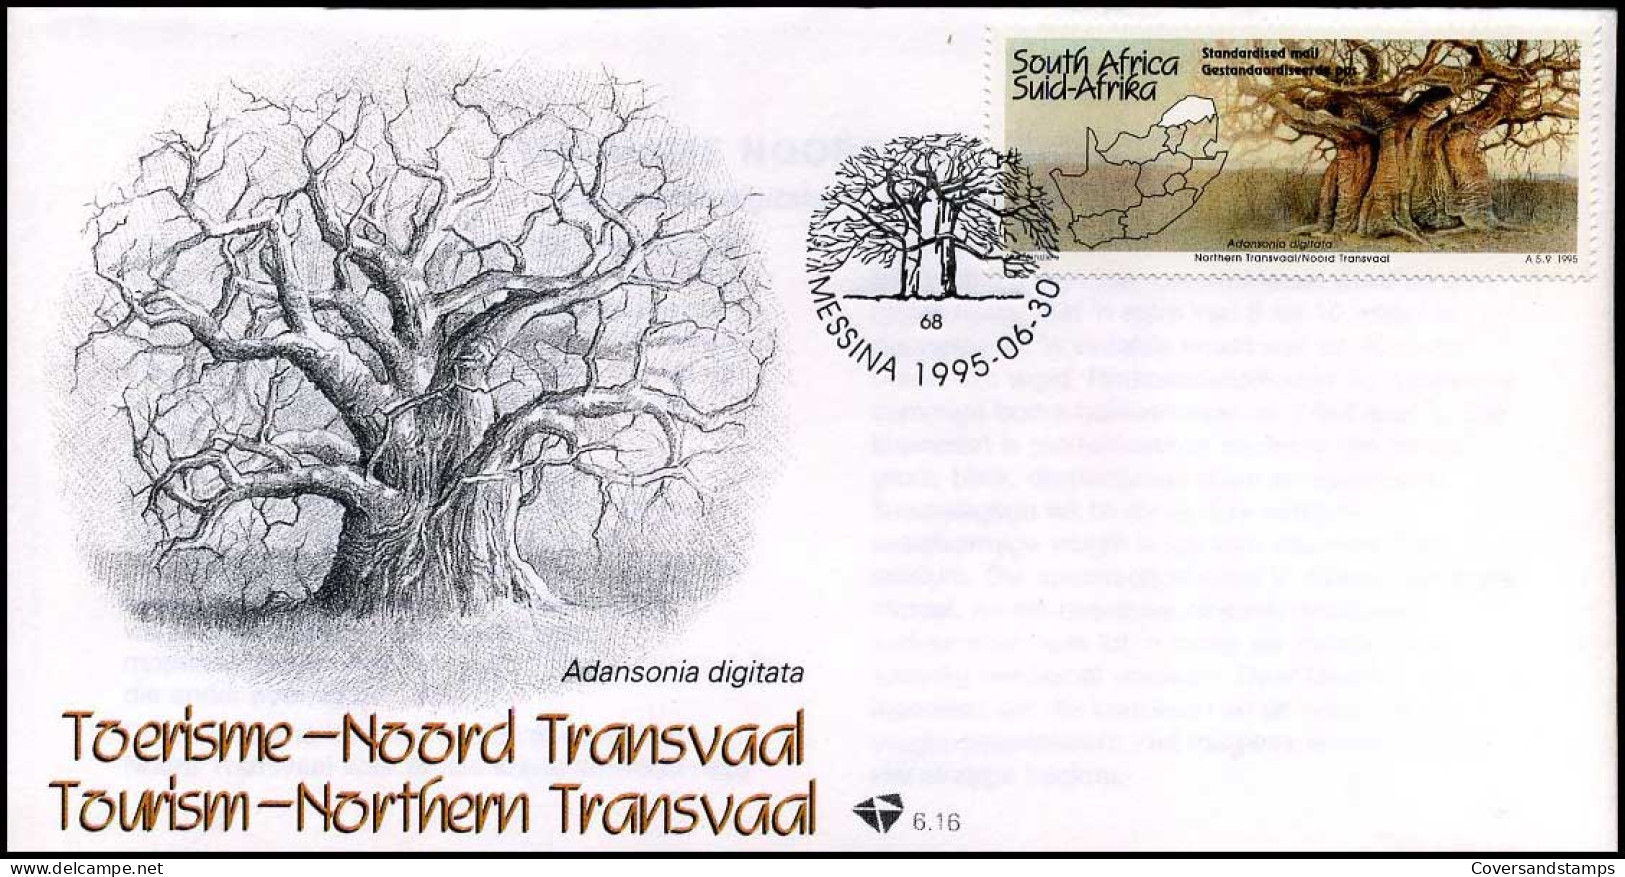 South-Africa - FDC - Tourism-Northern Transvaal - FDC